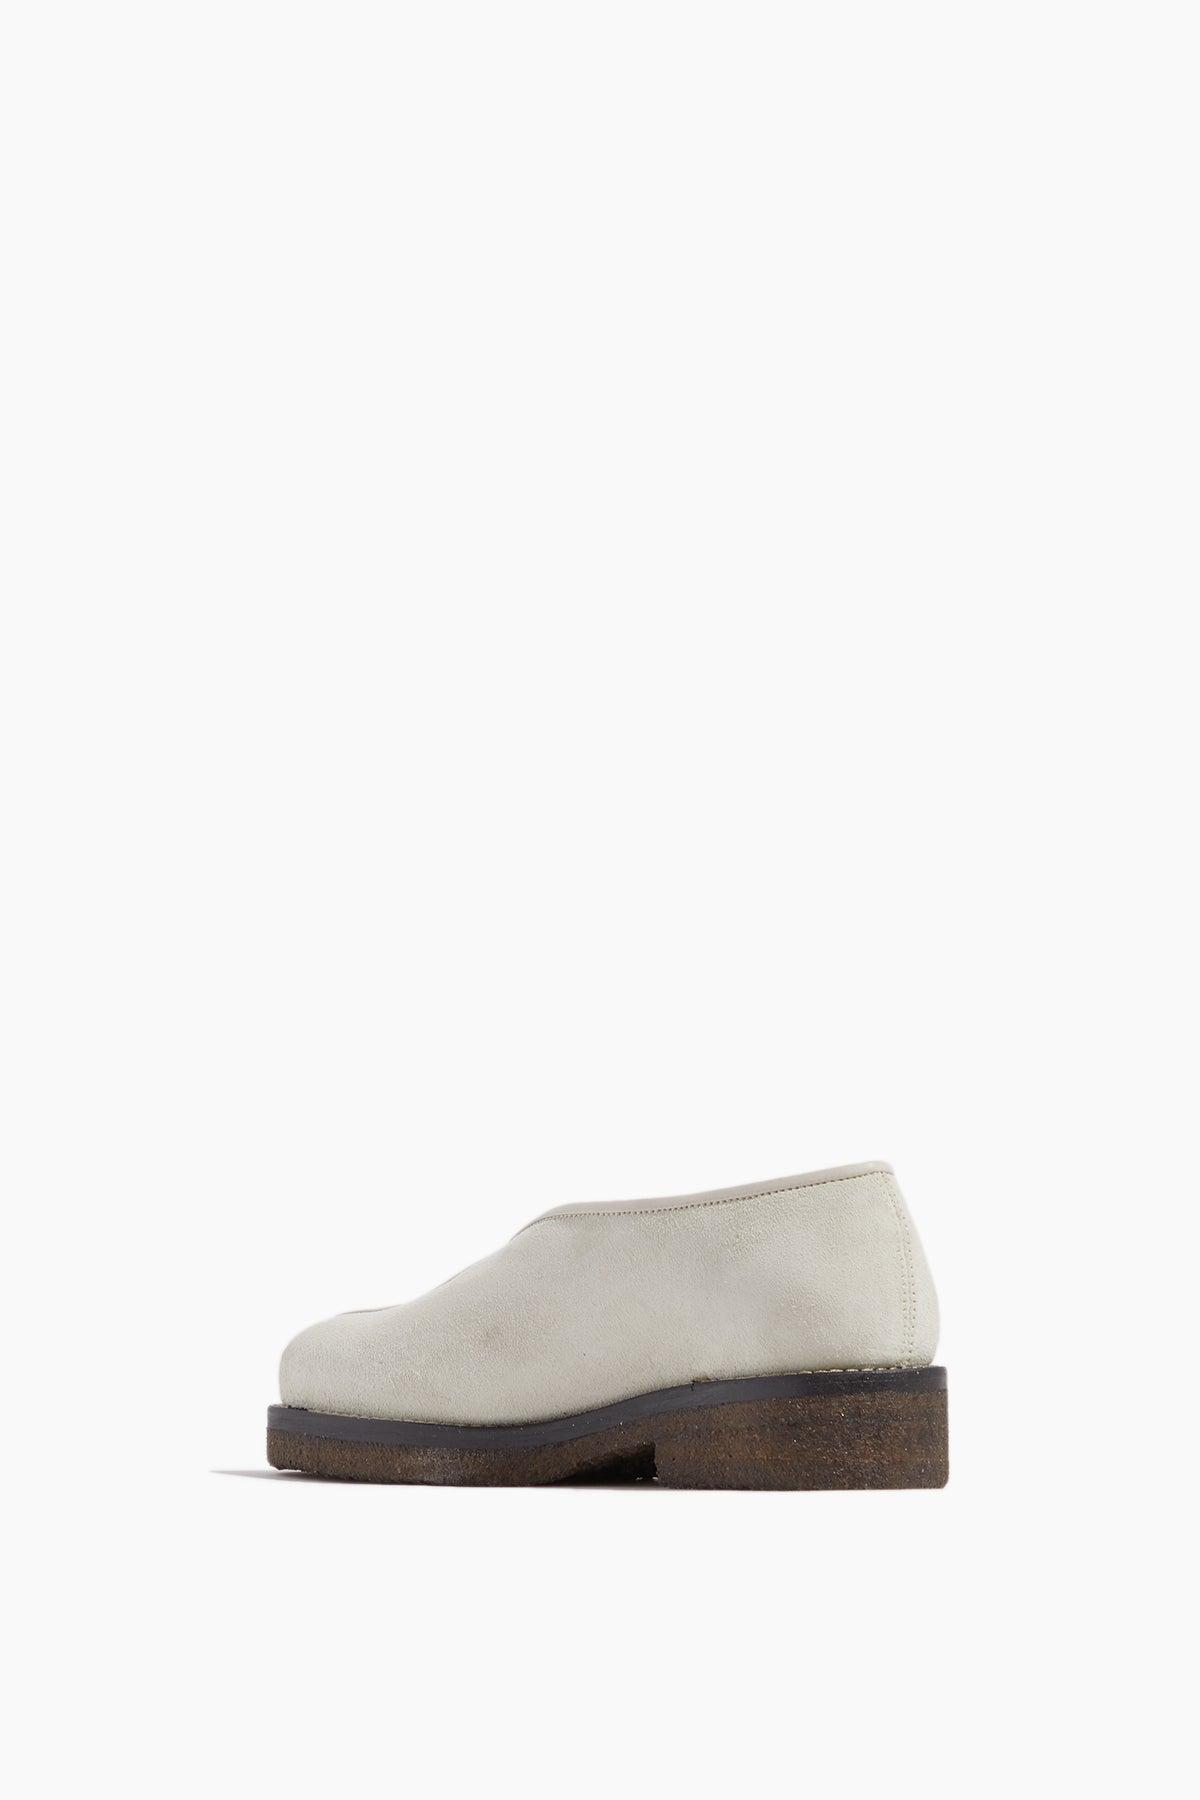 Lemaire Piped Slip On Shoe in White | Lyst